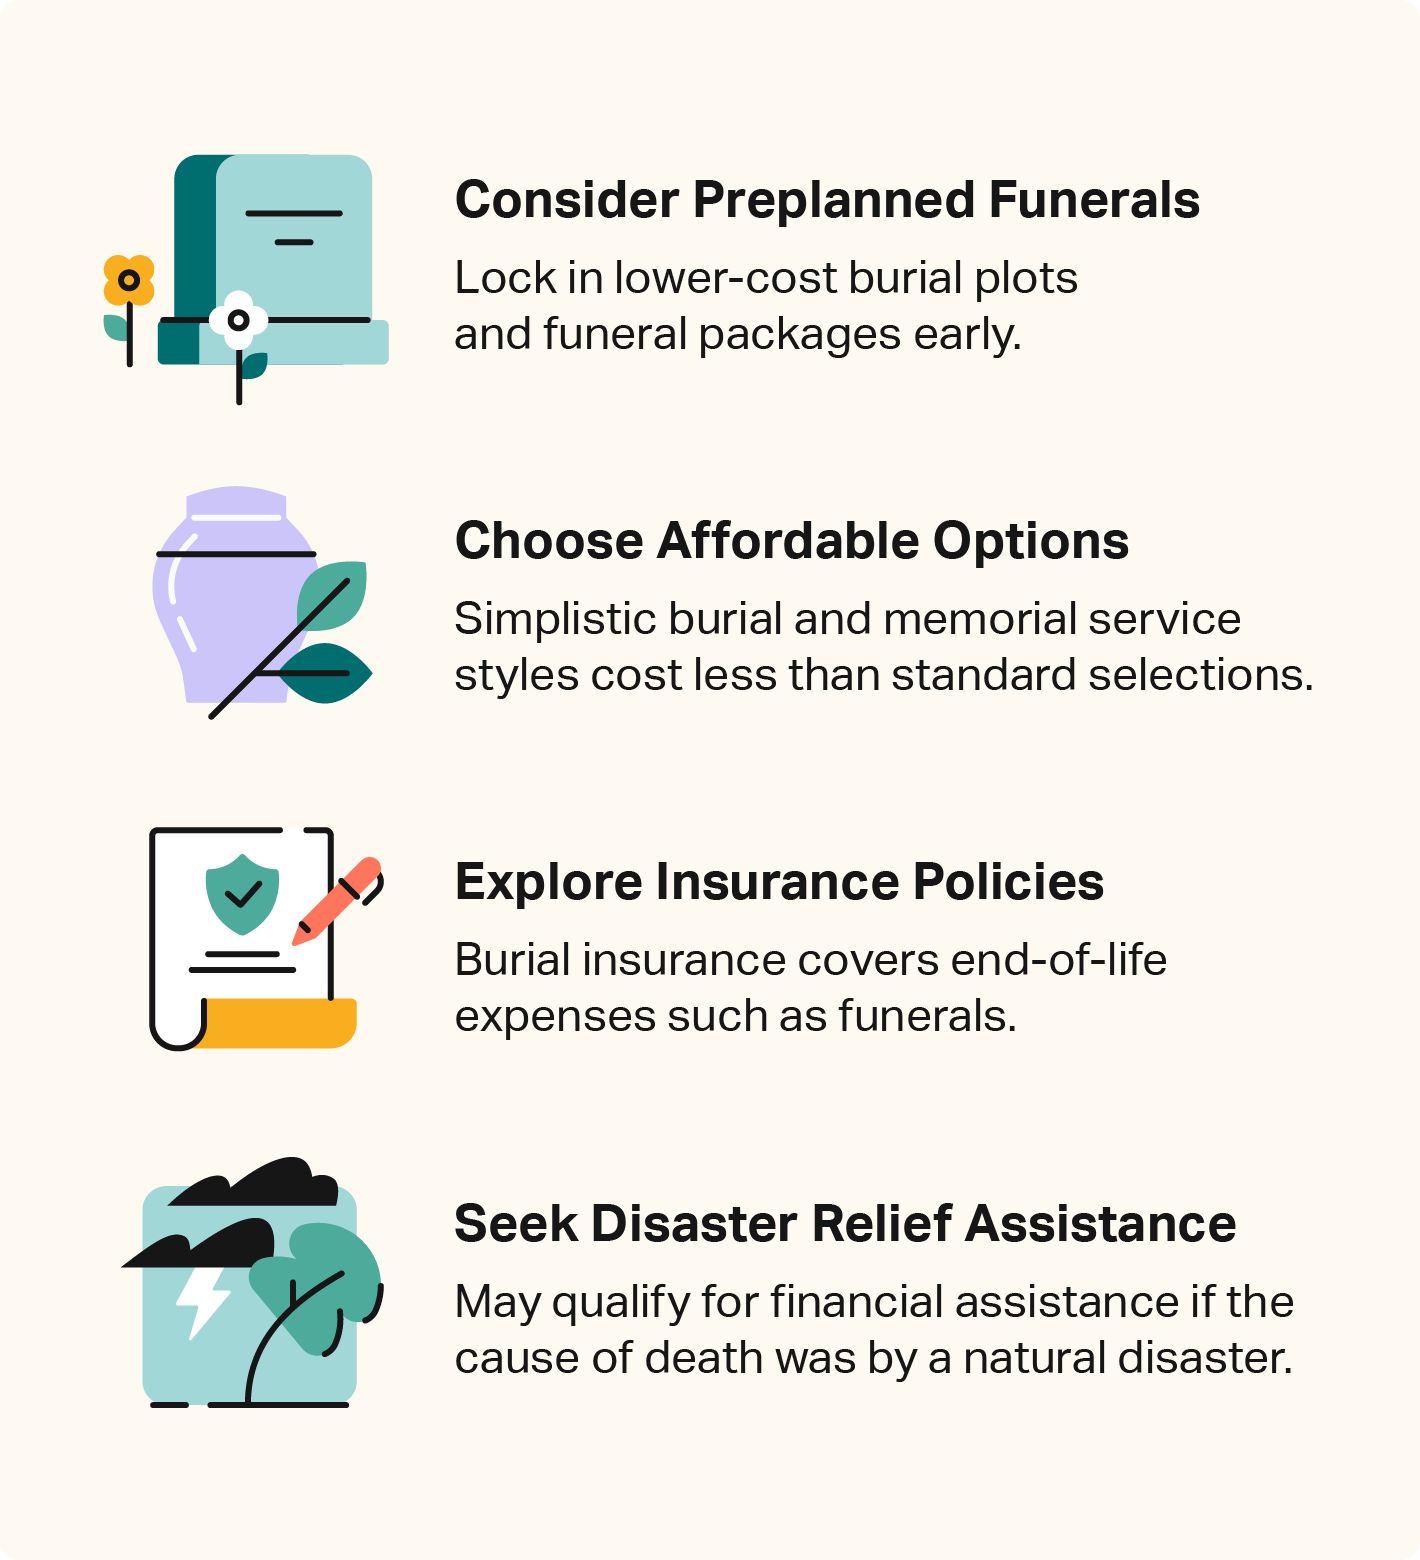 Illustrated icons accompany a list of tips to save on nondeductiblefuneral costs.